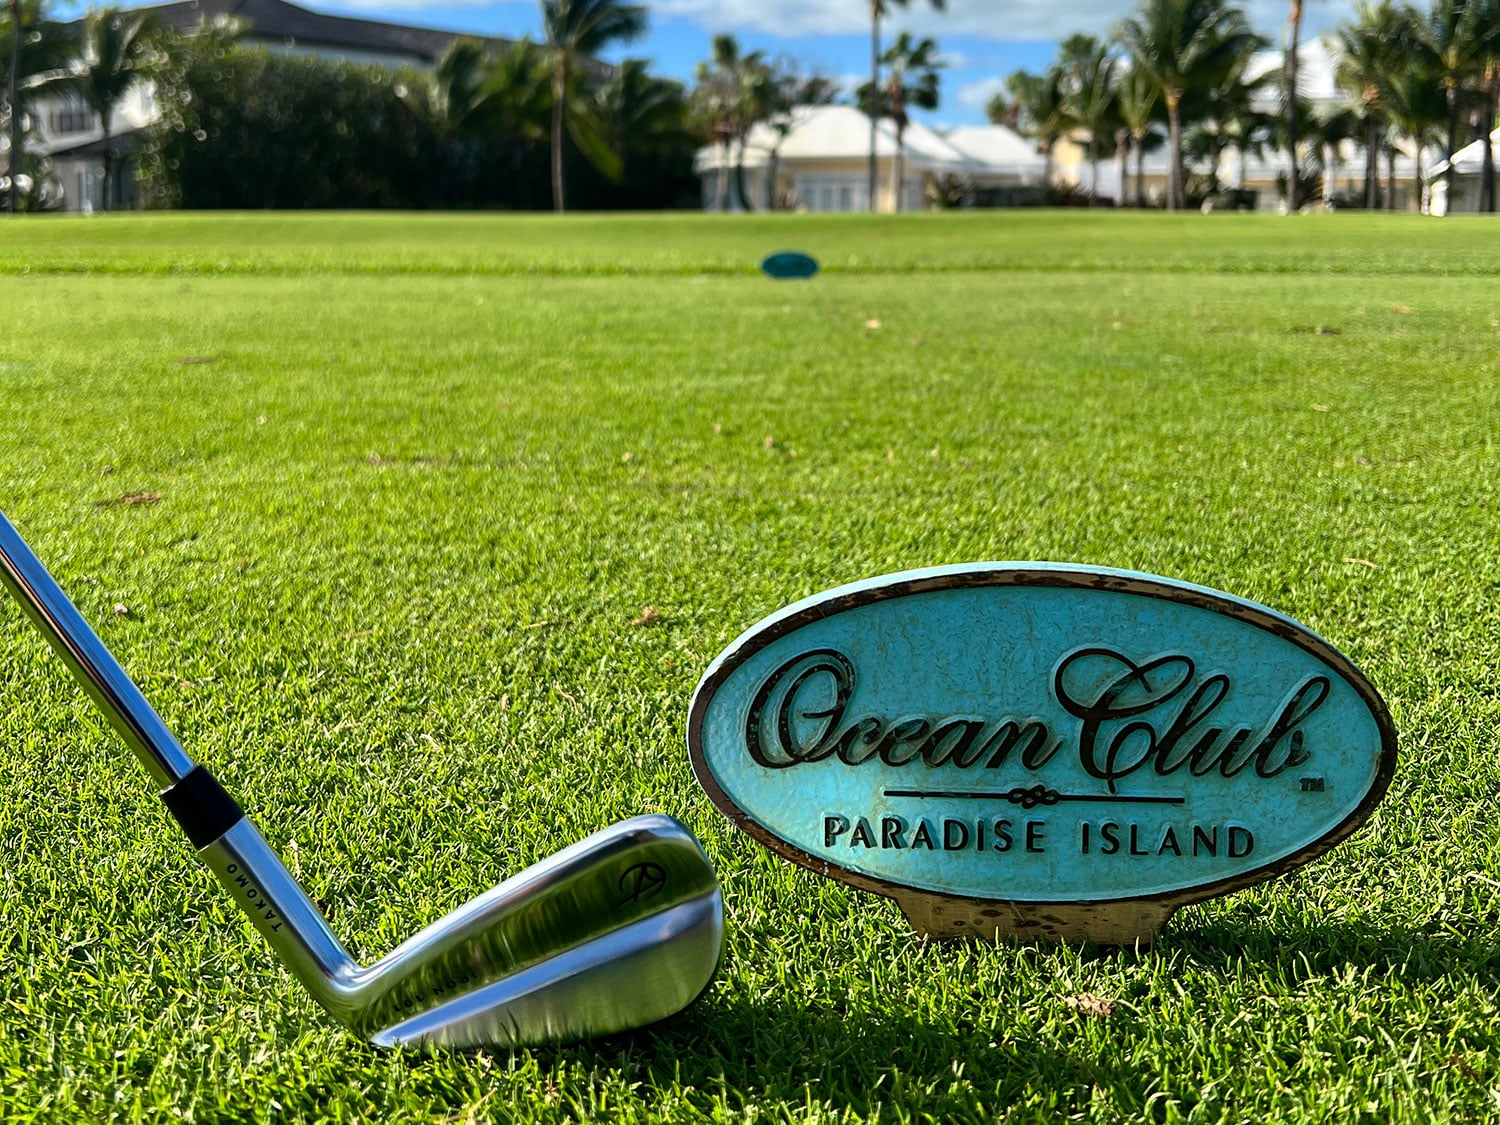 A Takomo 101 iron displayed next to a tee sign at the Ocean Club Golf Course in the Bahamas.